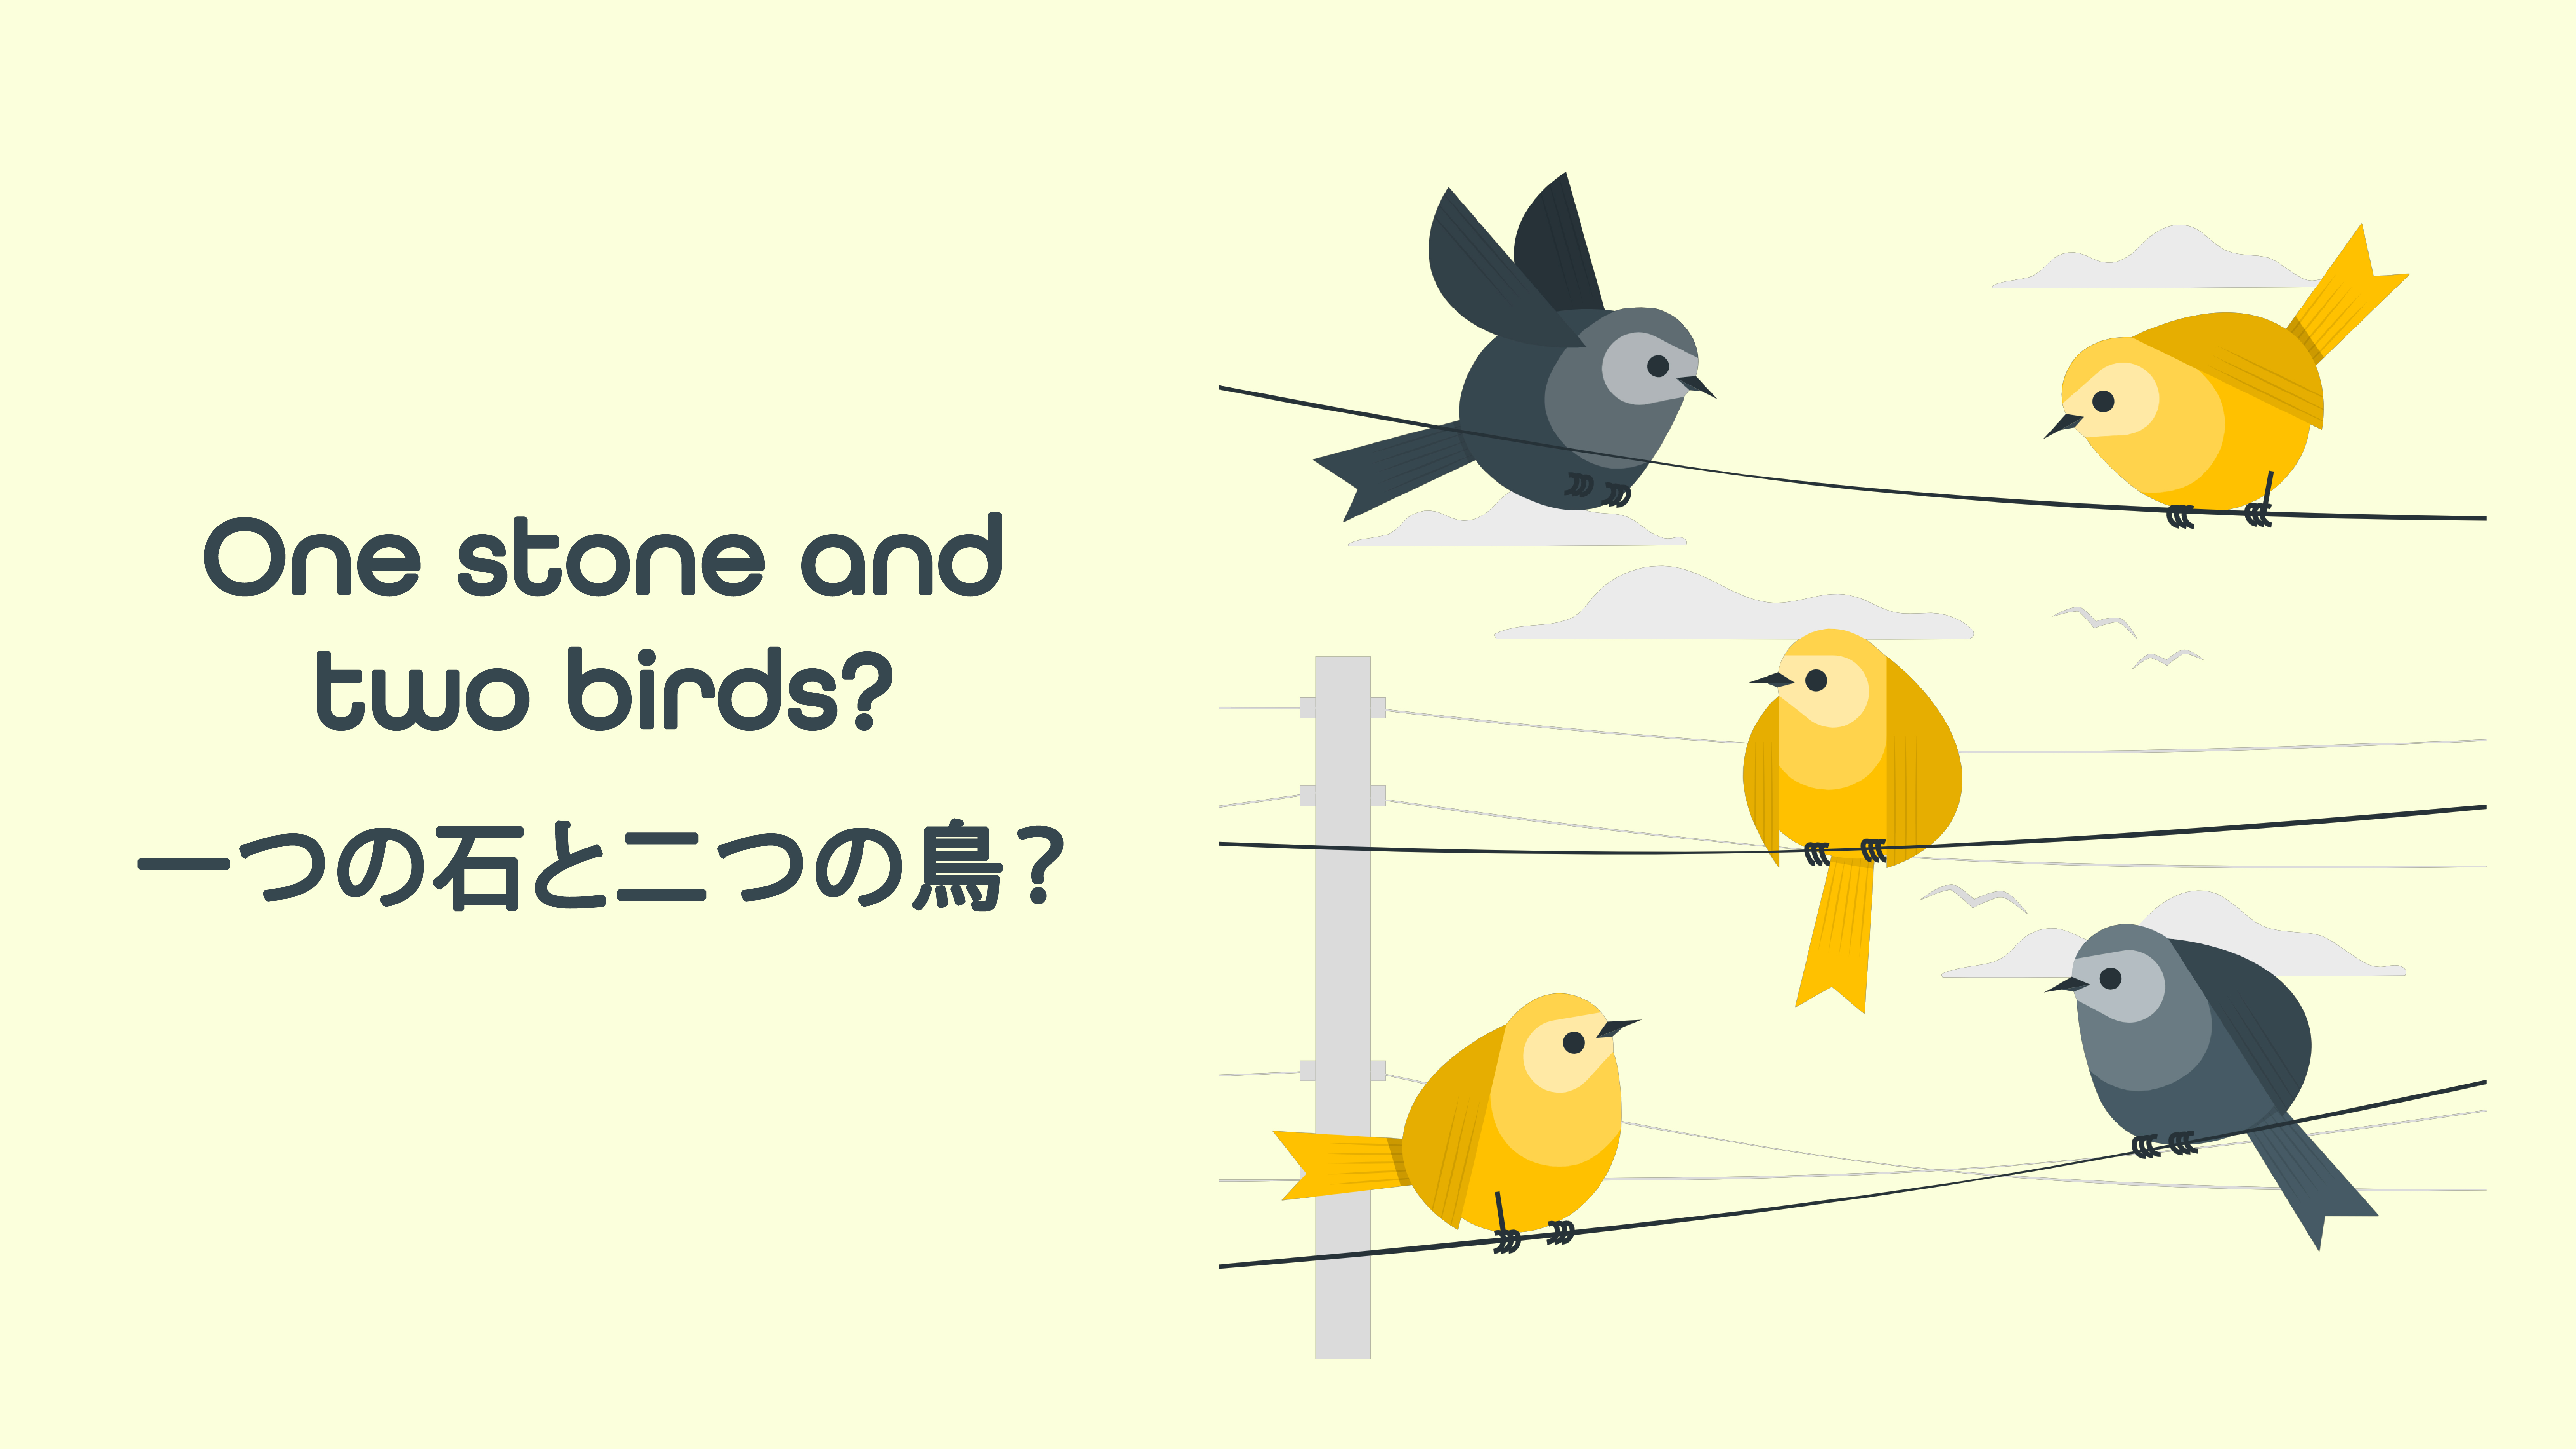 Featured image for “One stone and two birds? 一つの石と二つの鳥？”